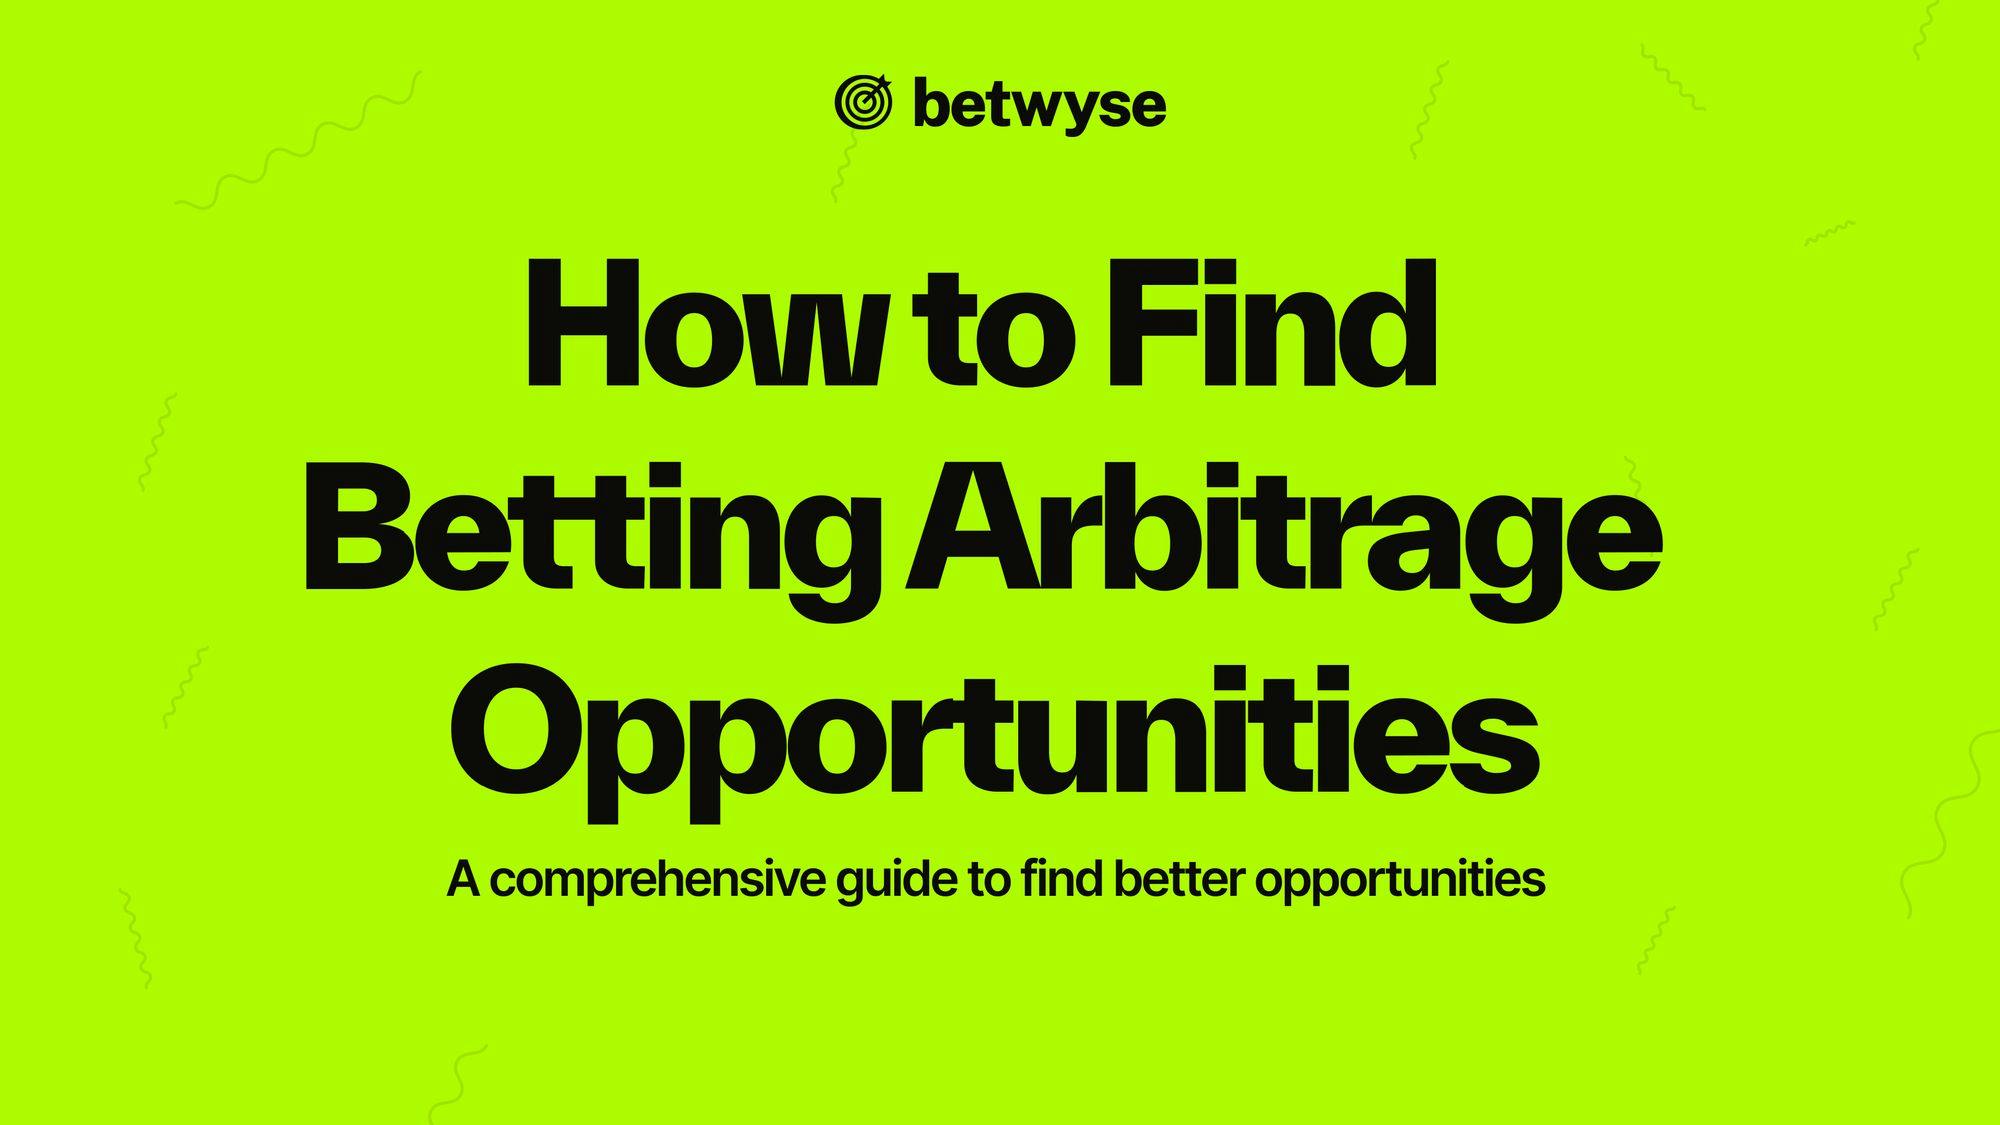 how to find betting arbitrage opportunities image